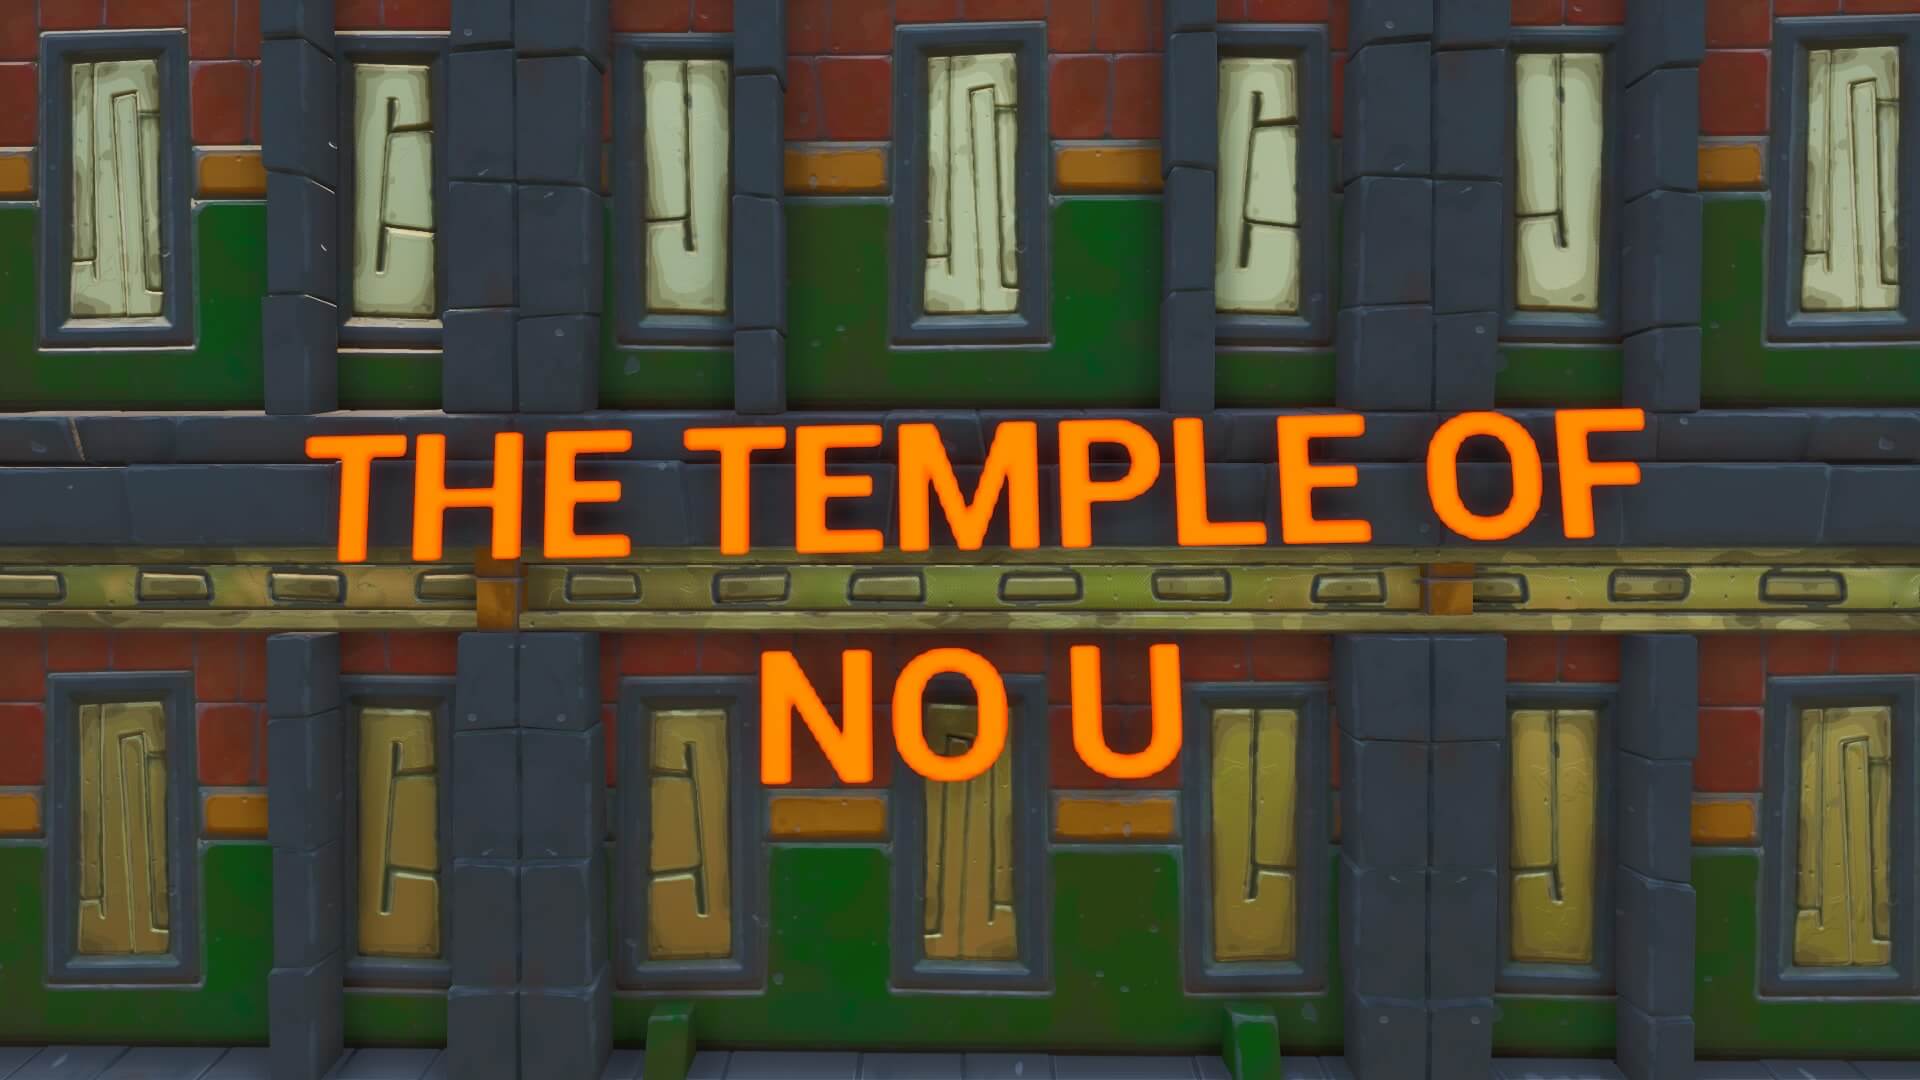 THE TEMPLE OF NO U